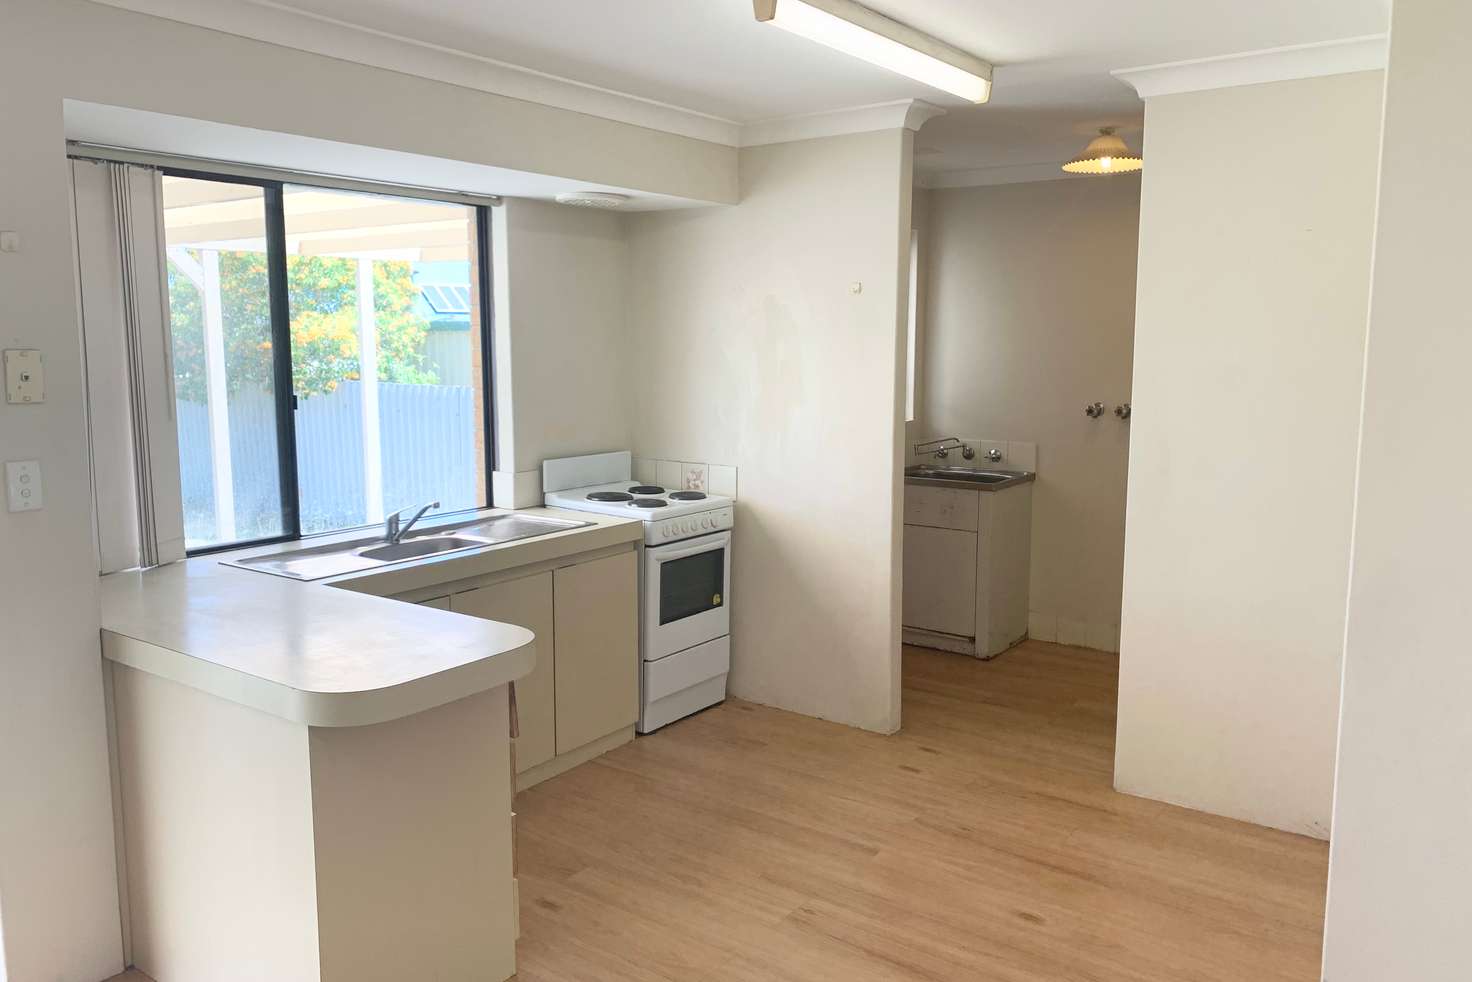 Main view of Homely house listing, 13 Farleigh Drive, Willetton WA 6155